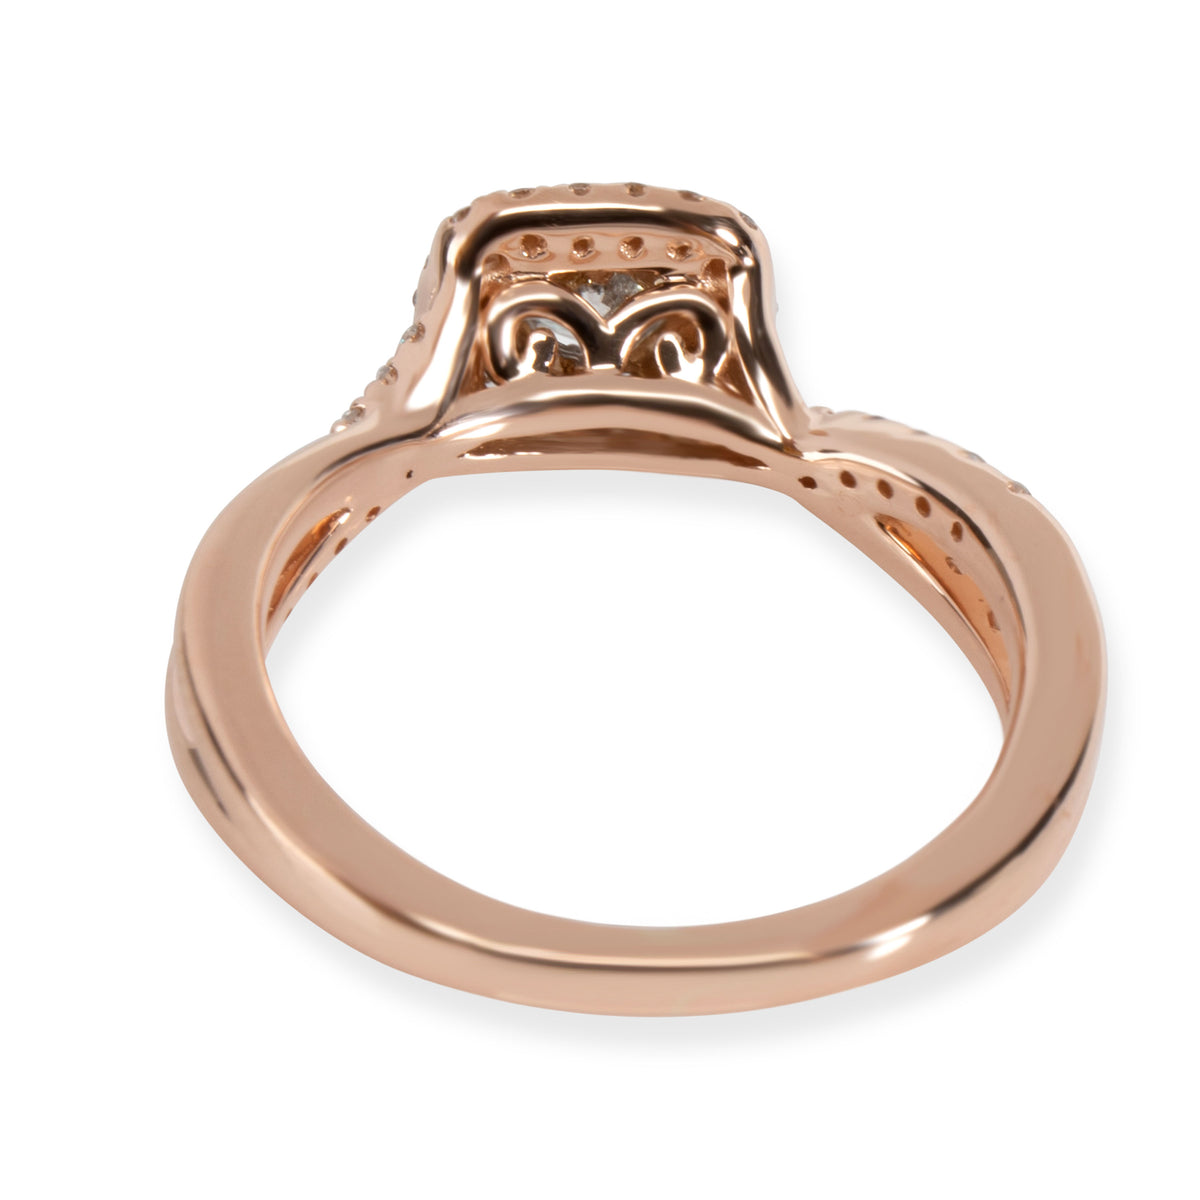 Halo Diamond Engagement Ring in 14K Rose Gold F-G SI2 0.5 CTW